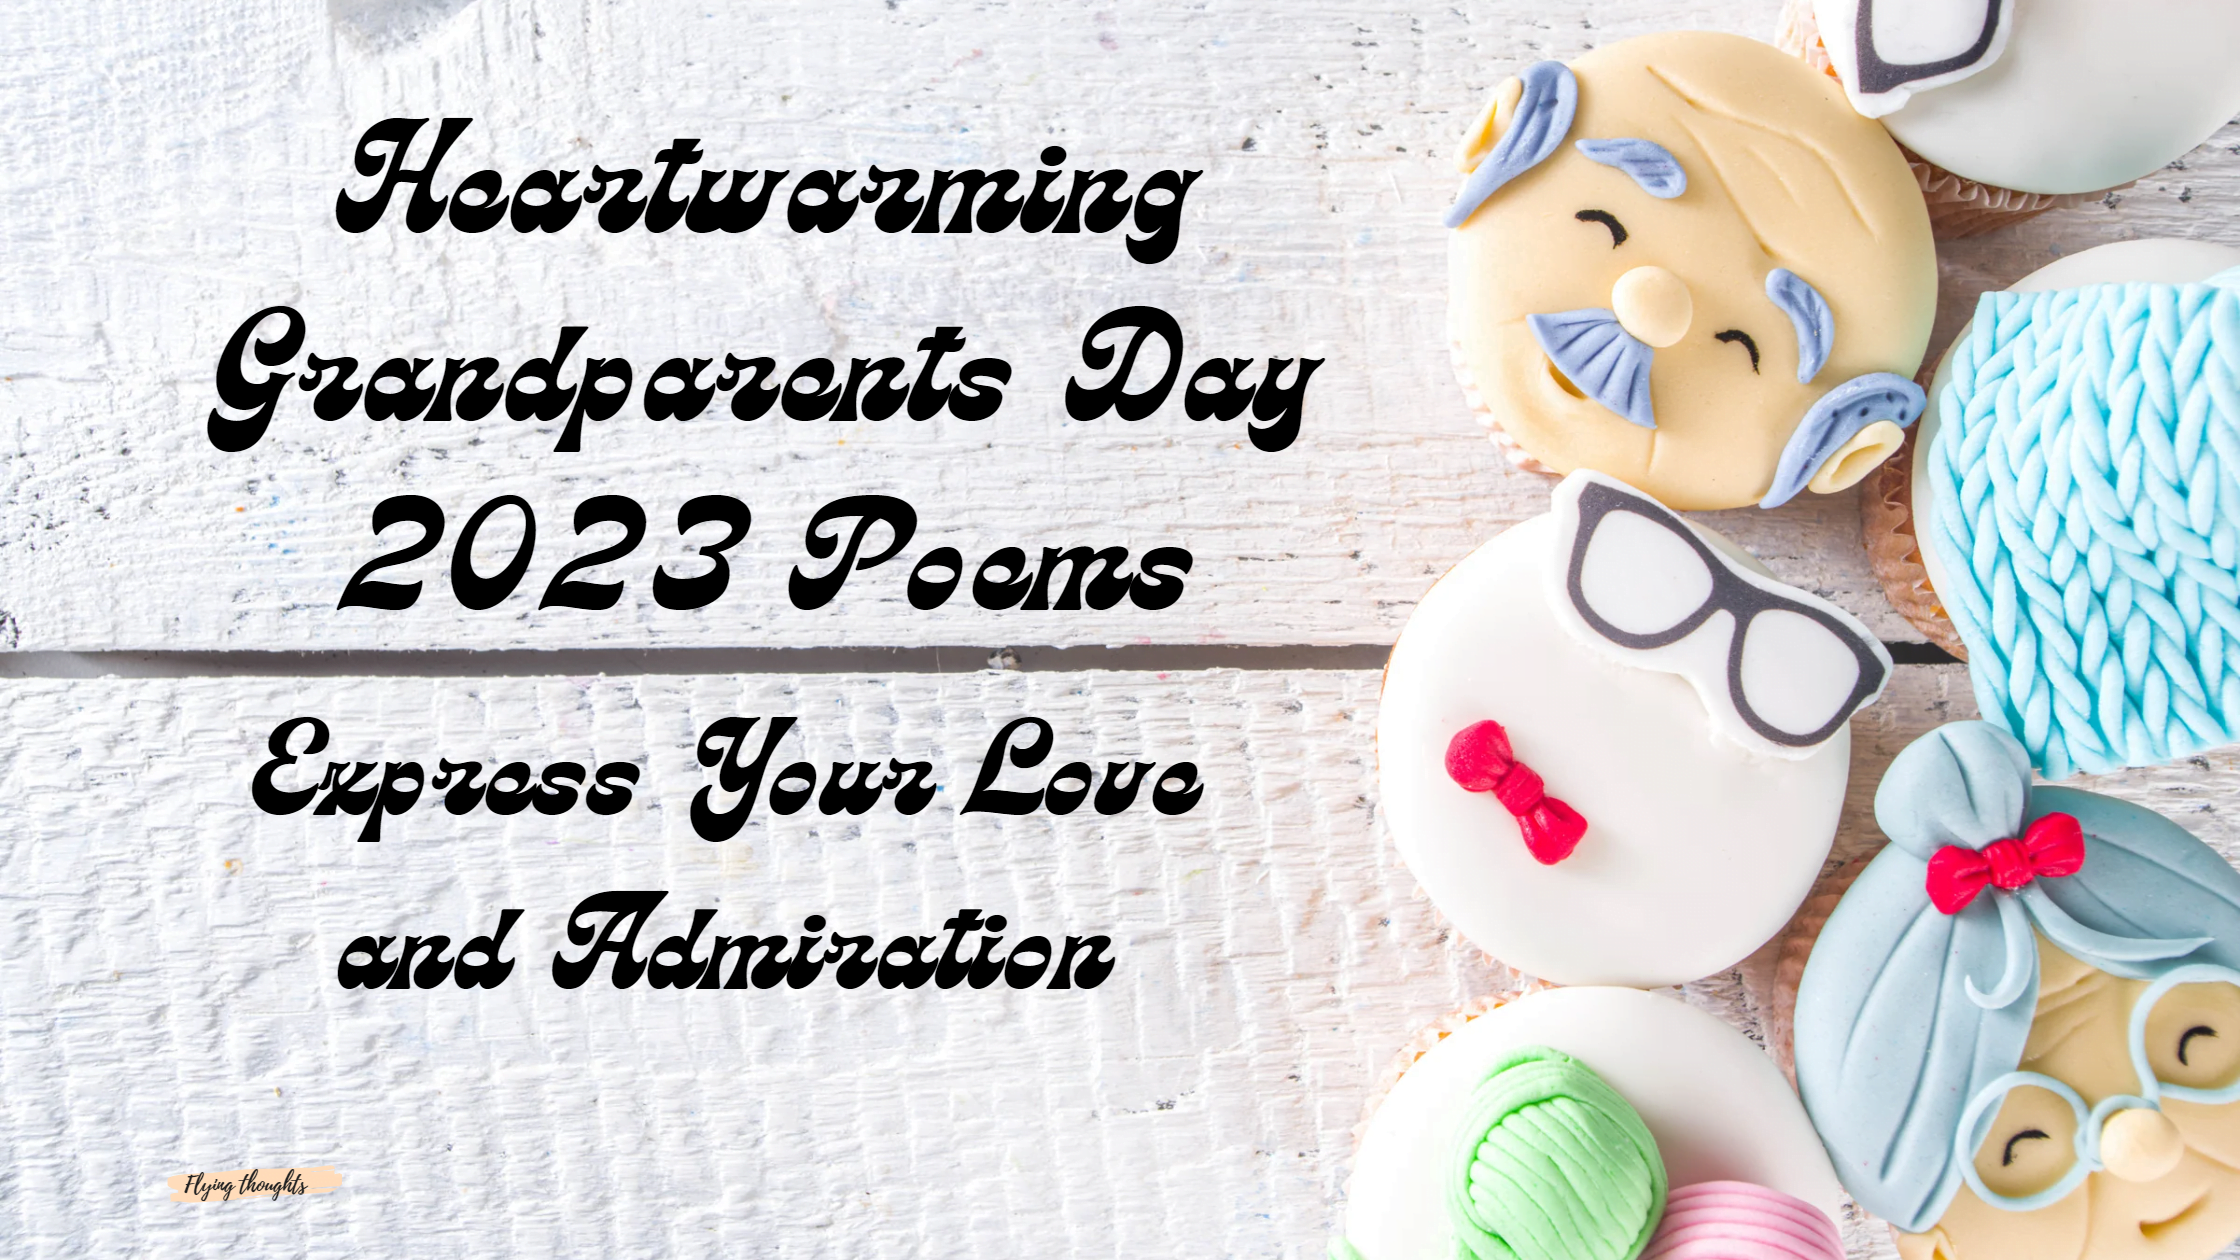 Heartwarming Grandparents Day 2023 Poems: Express Your Love and Admiration